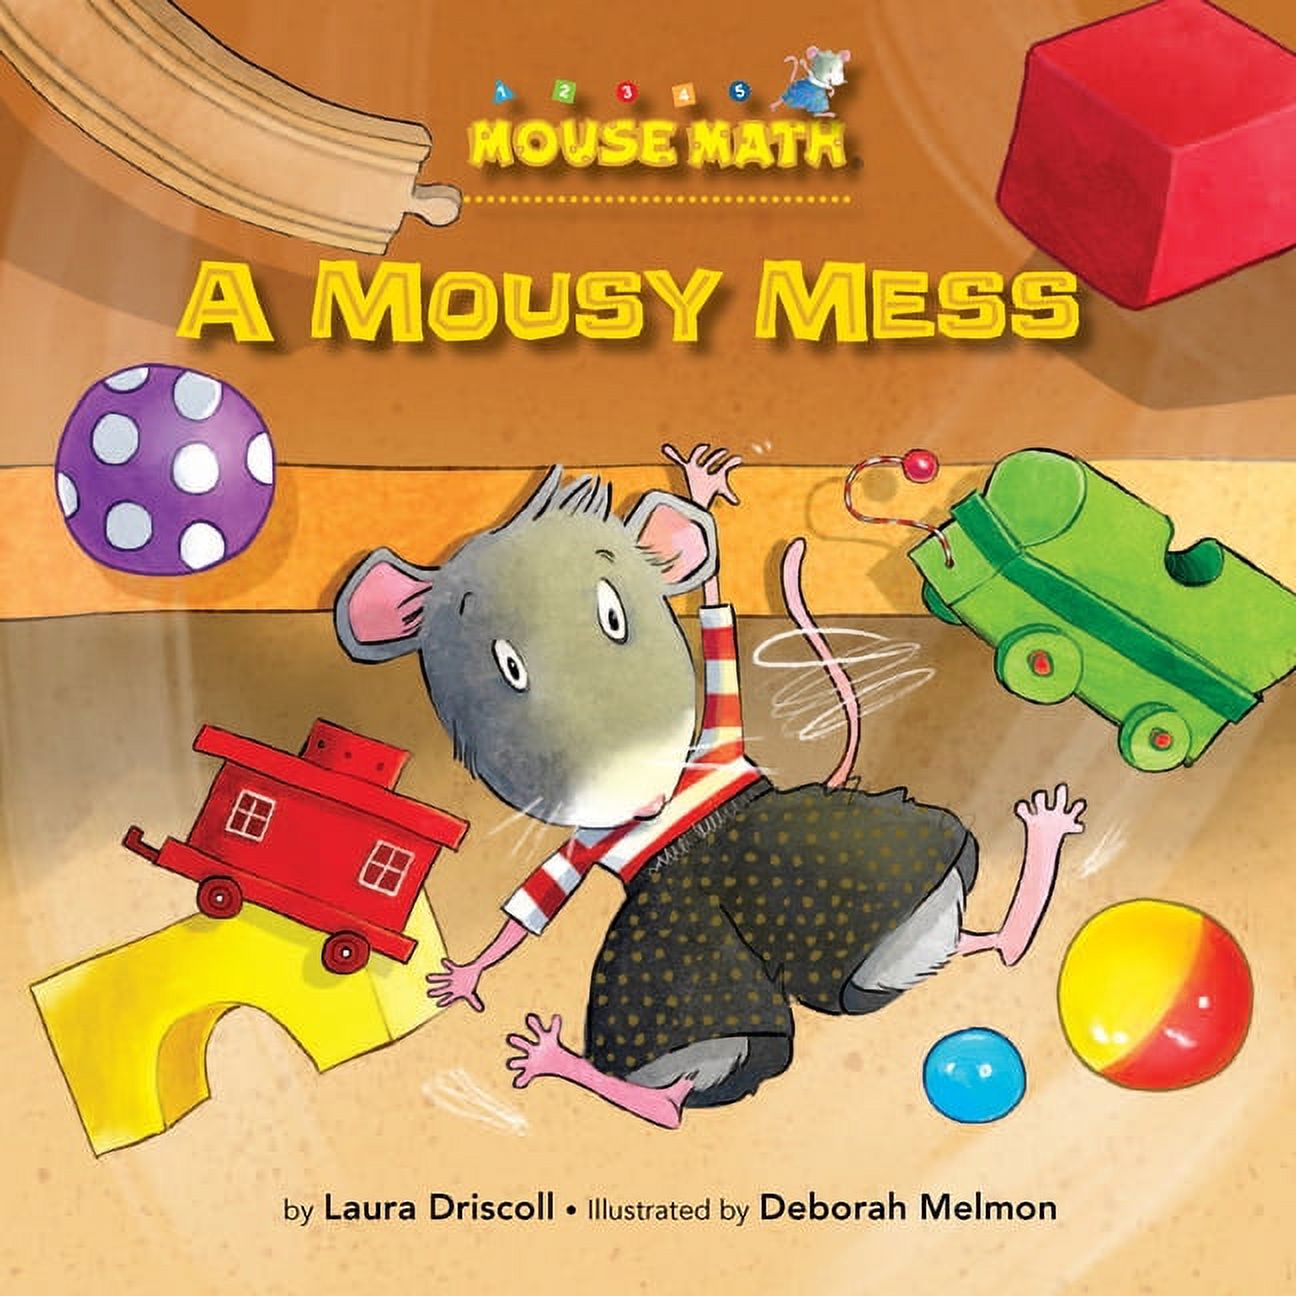 Mouse Math: A Mousy Mess (Paperback) - image 1 of 1